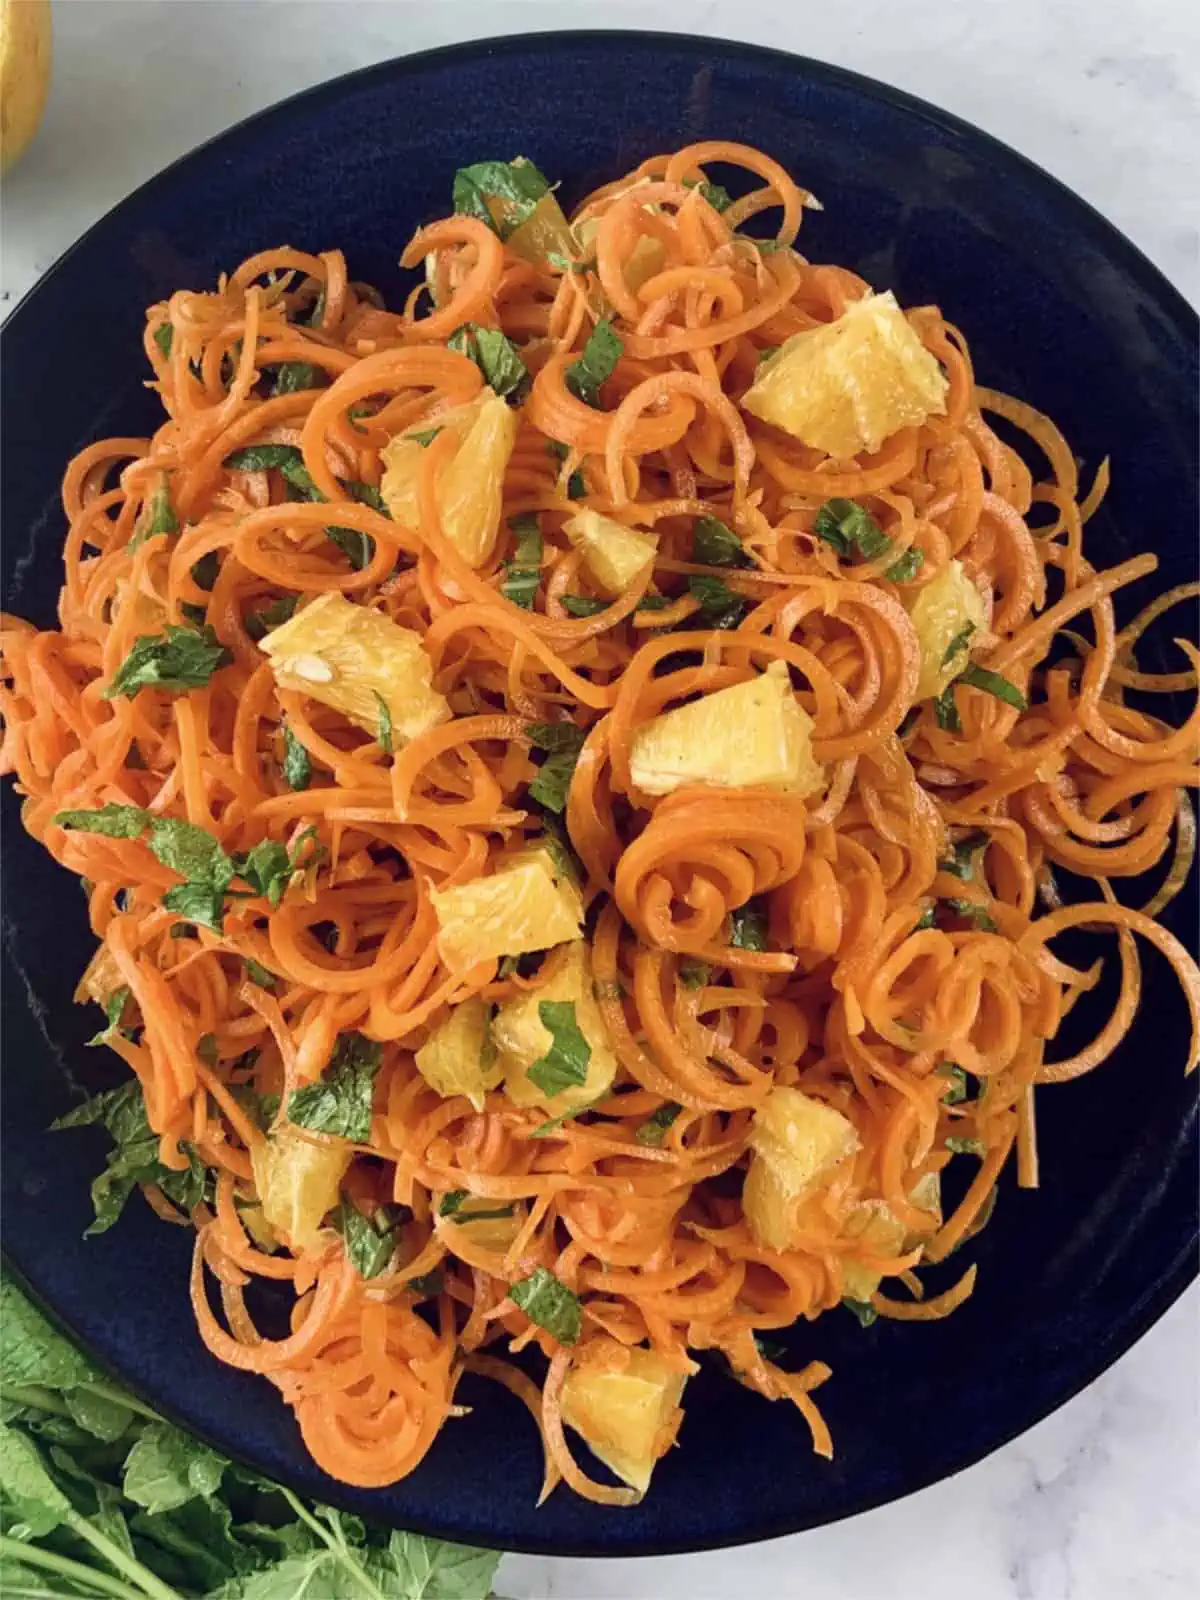 A close up of spiral carrot & orange salad on a navy blue plate.